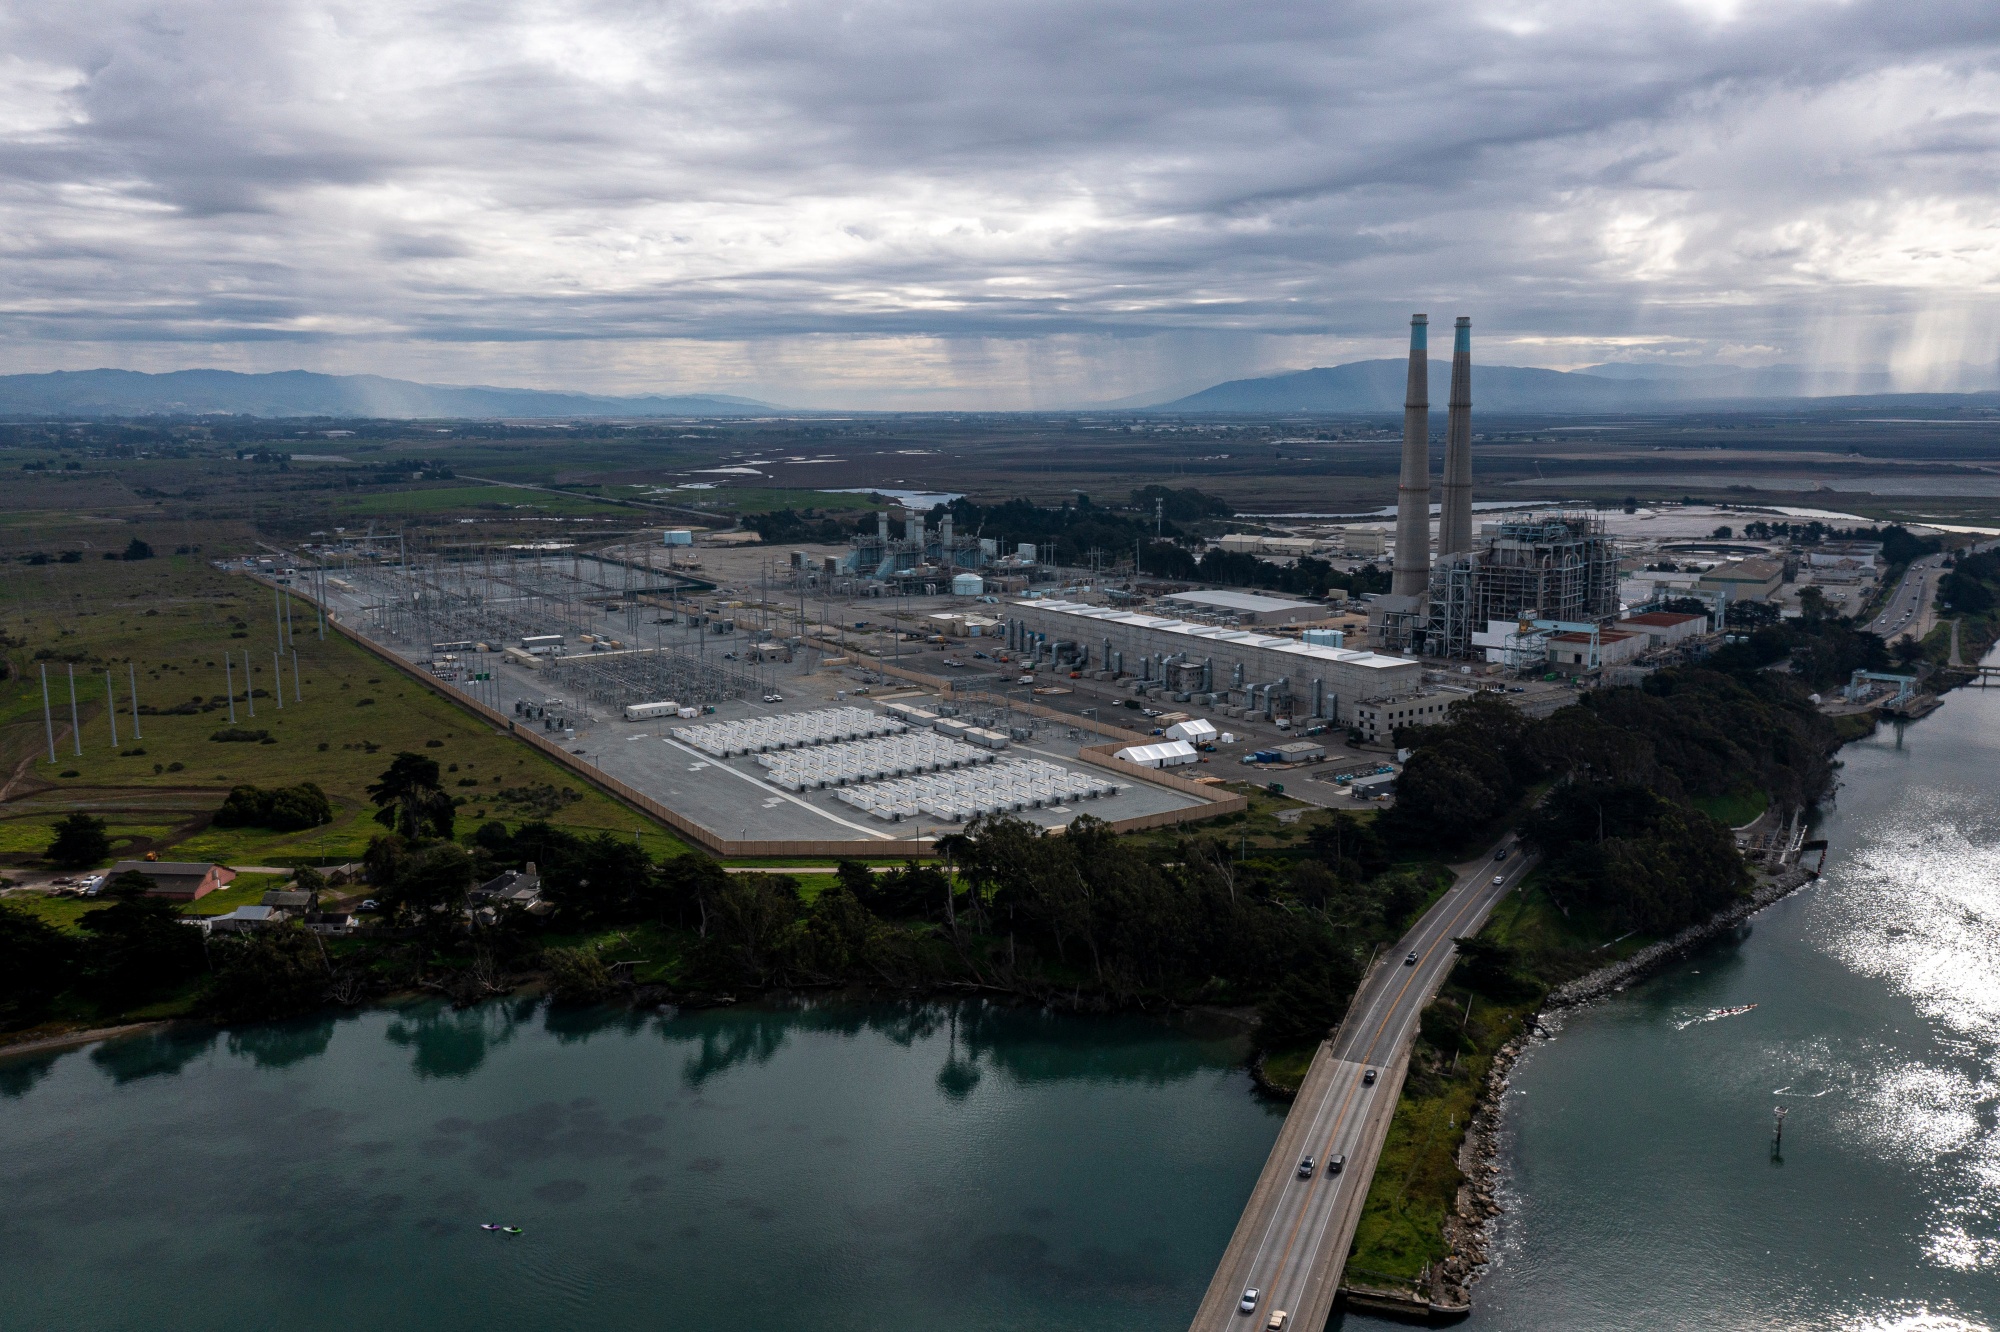 The Elkhorn Battery Energy Storage System next to the Vistra Moss Landing natural gas fired power plant in California.